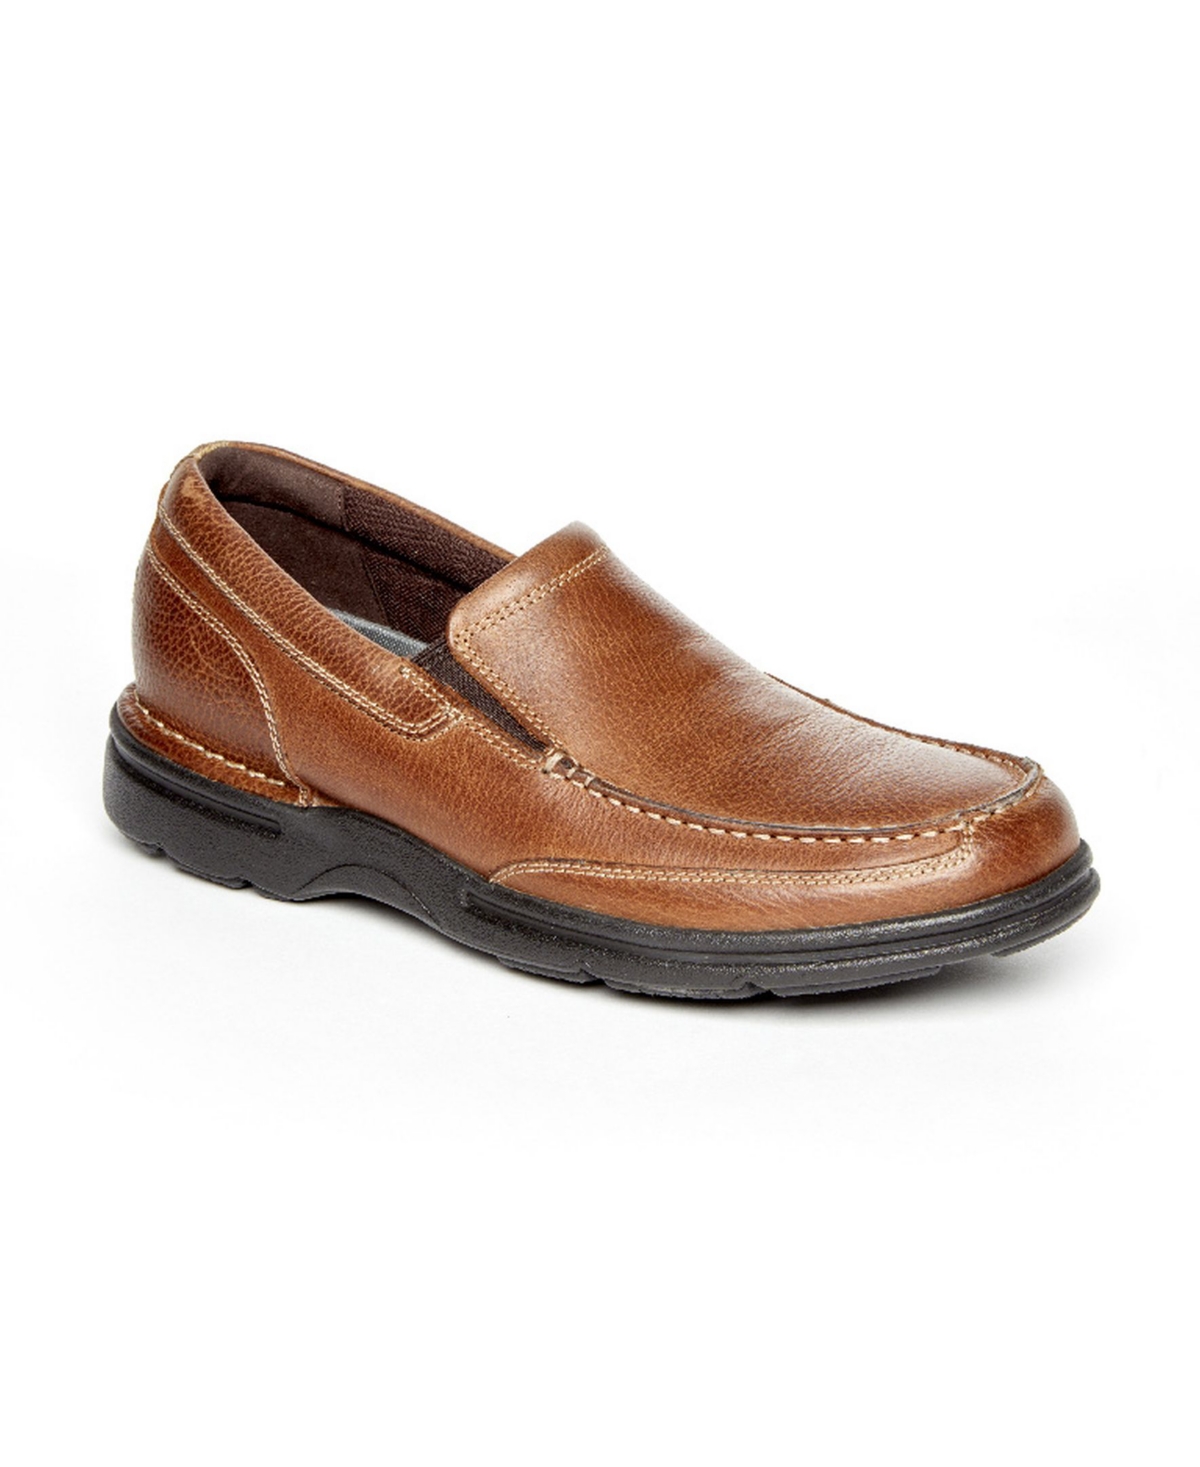 Affordable goods A fun and fashionable brand Rockport Men's Eureka Plus ...